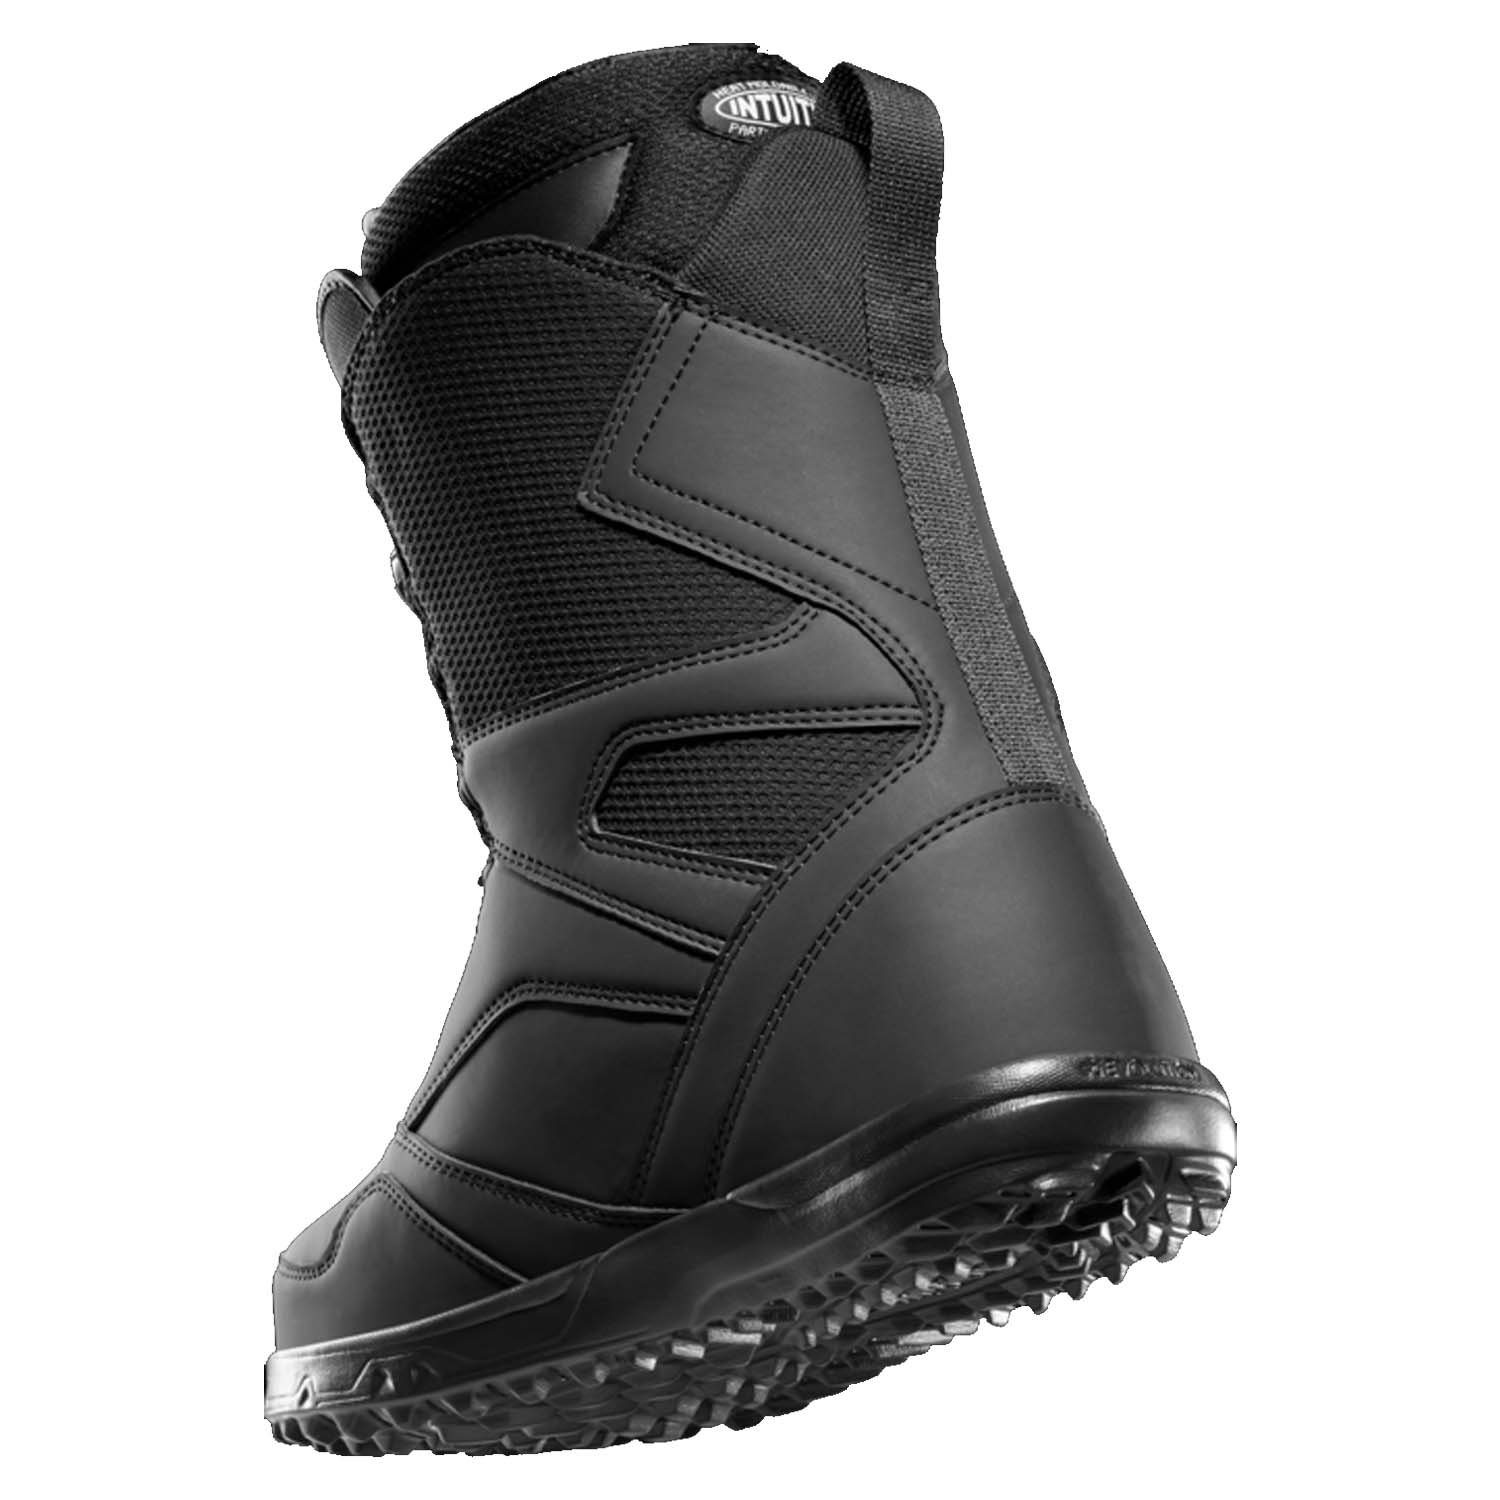 ThirtyTwo STW Double Boa Snowboard Boots Black 2021